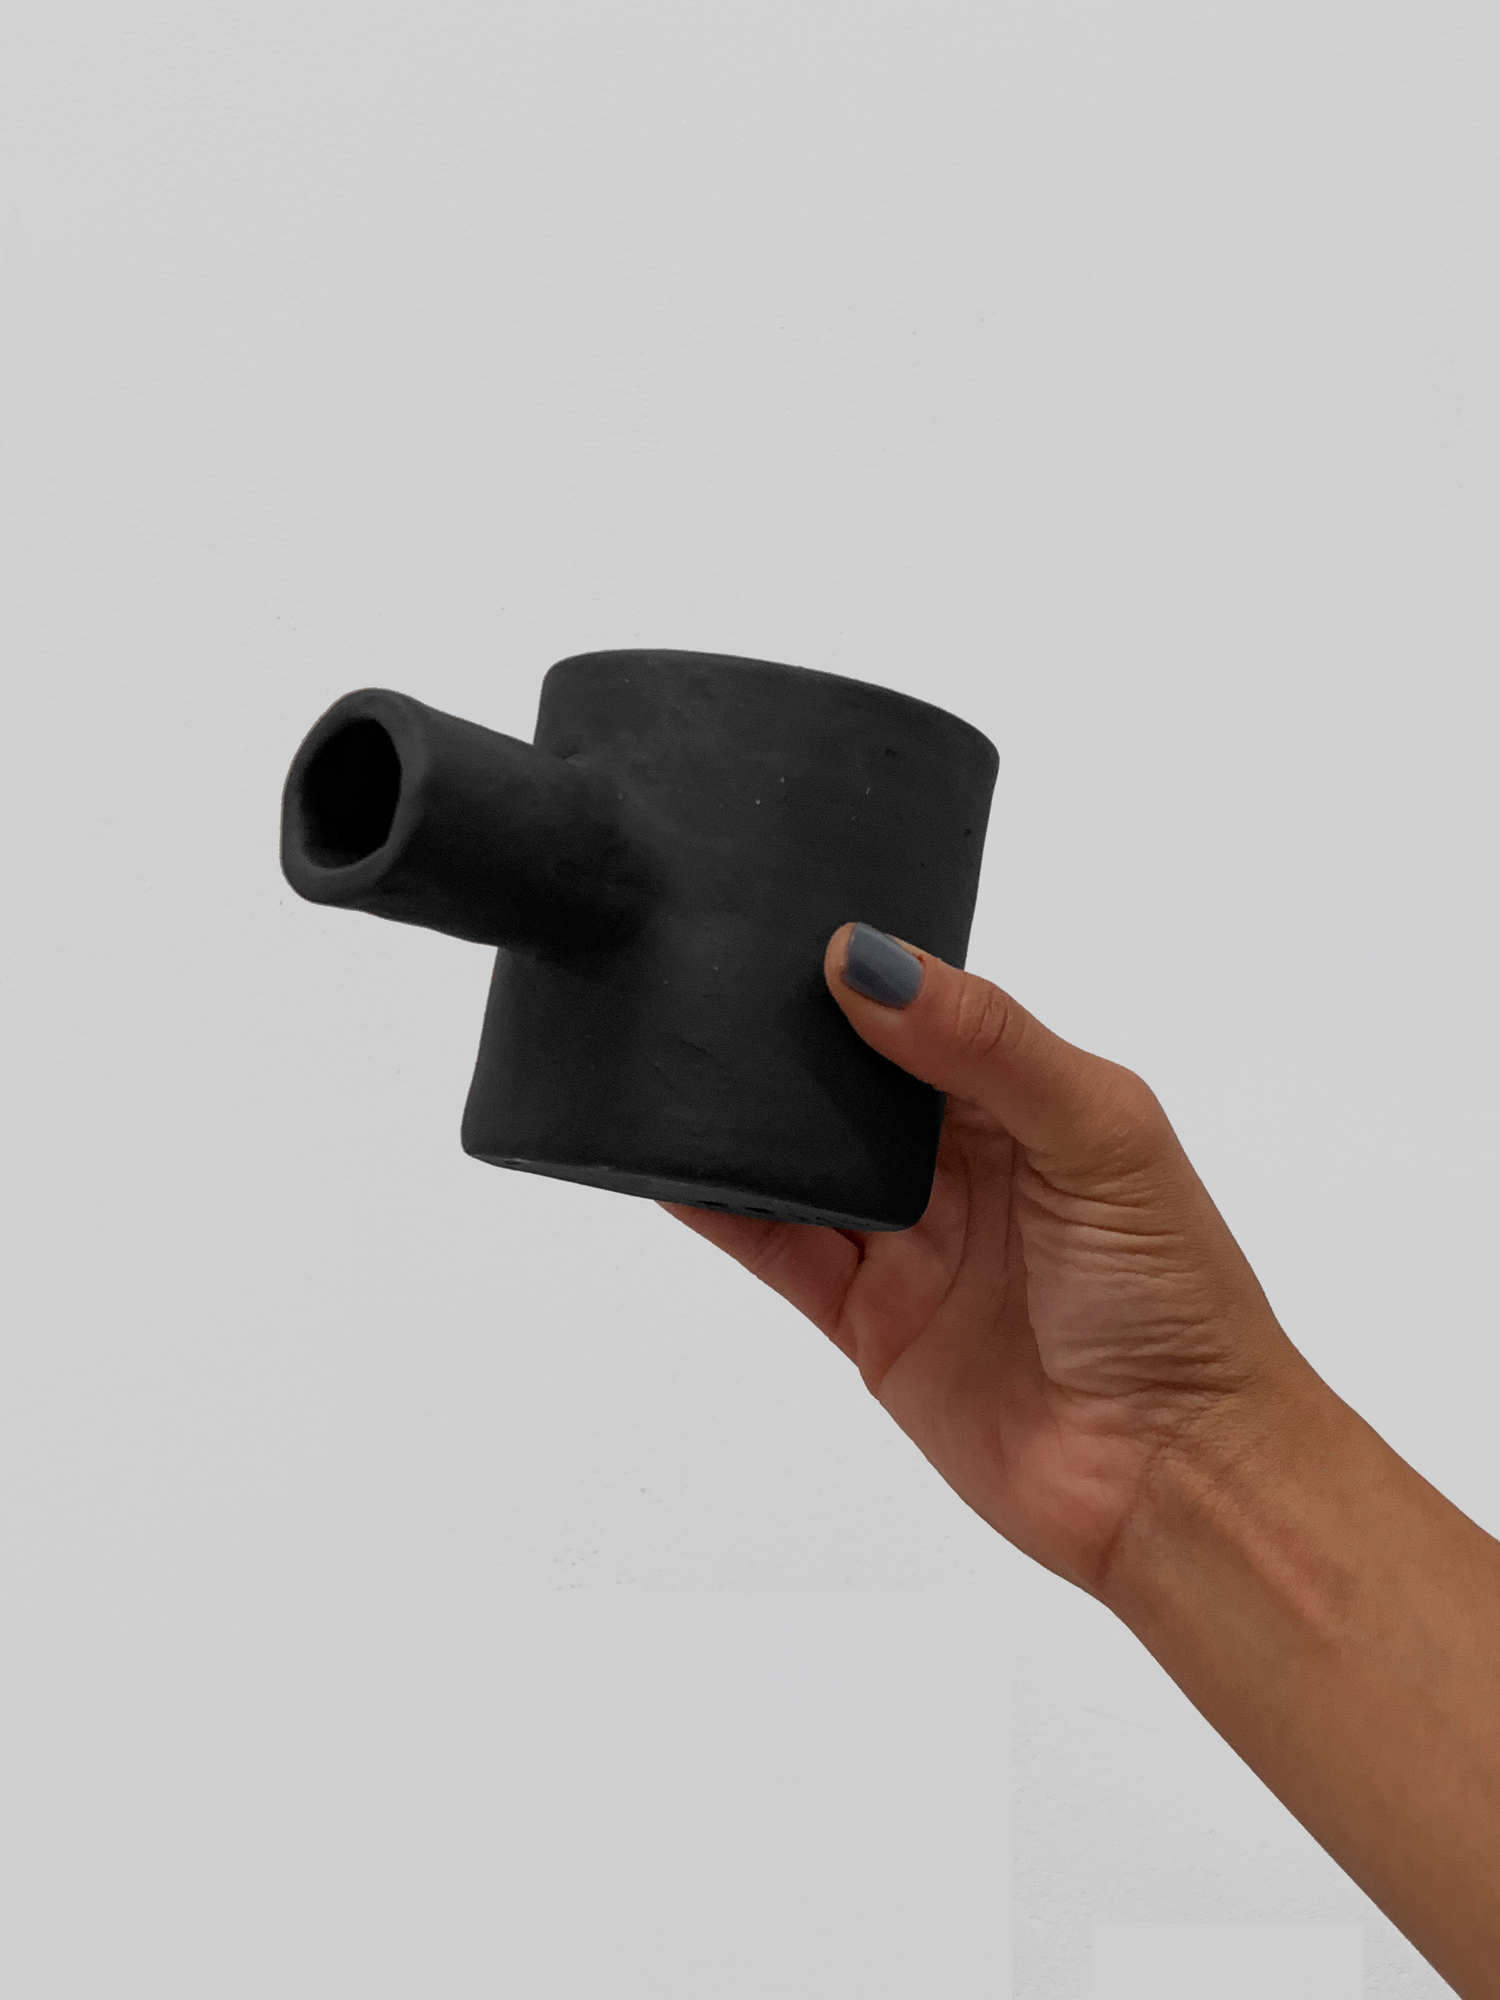 Black matte stoneware ceramic mug with a cylinder through the mug and extending out as the handle.